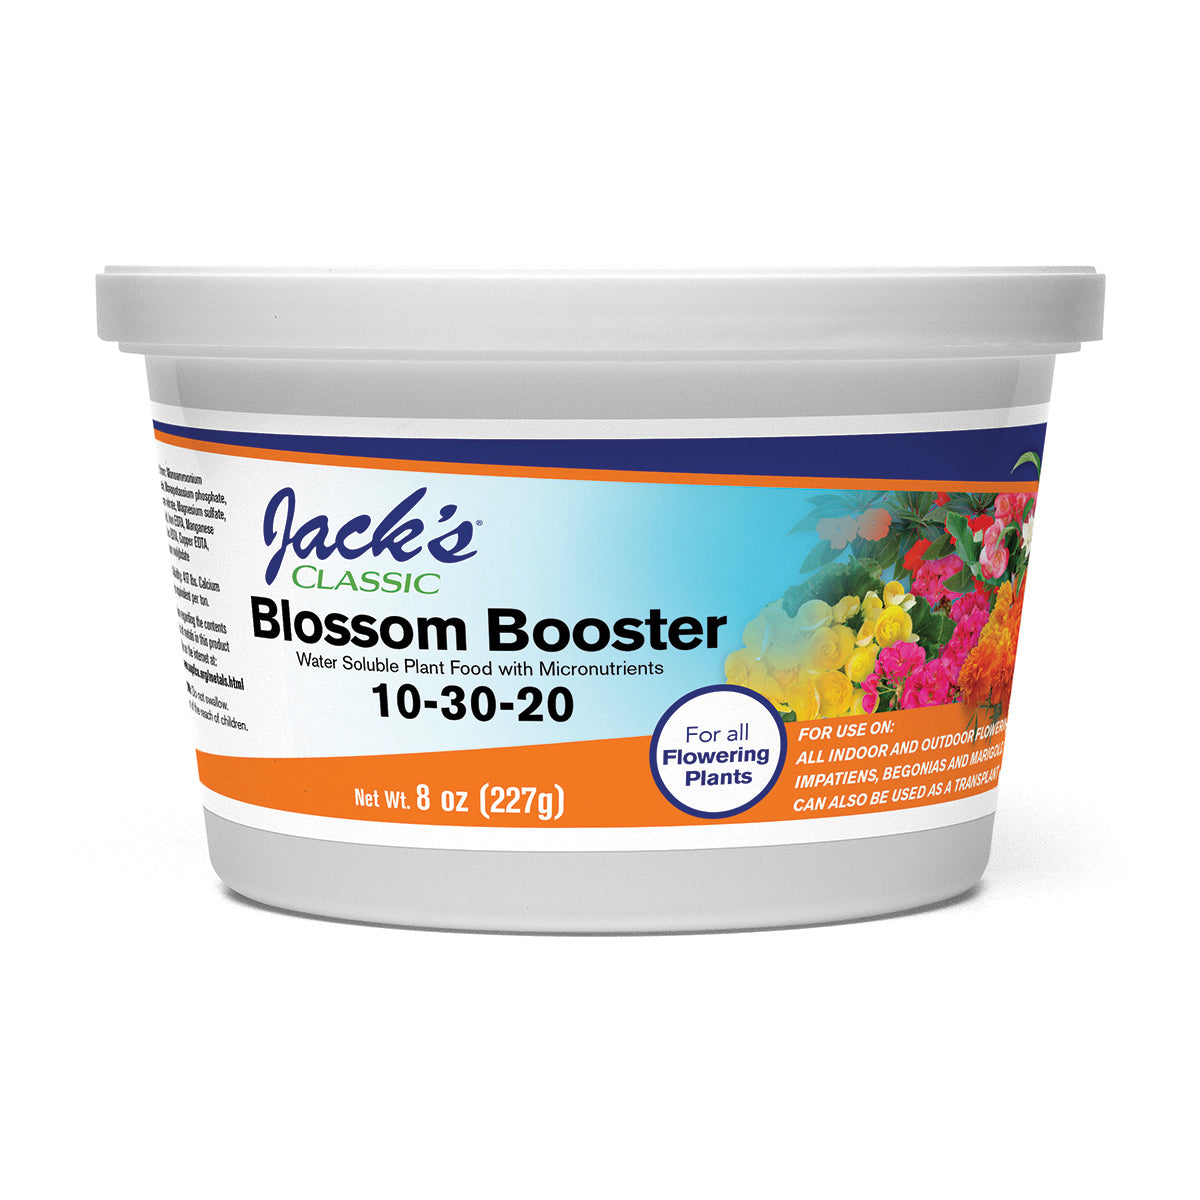 Product Image:Jack's Classic Blossom Booster 10-30-20